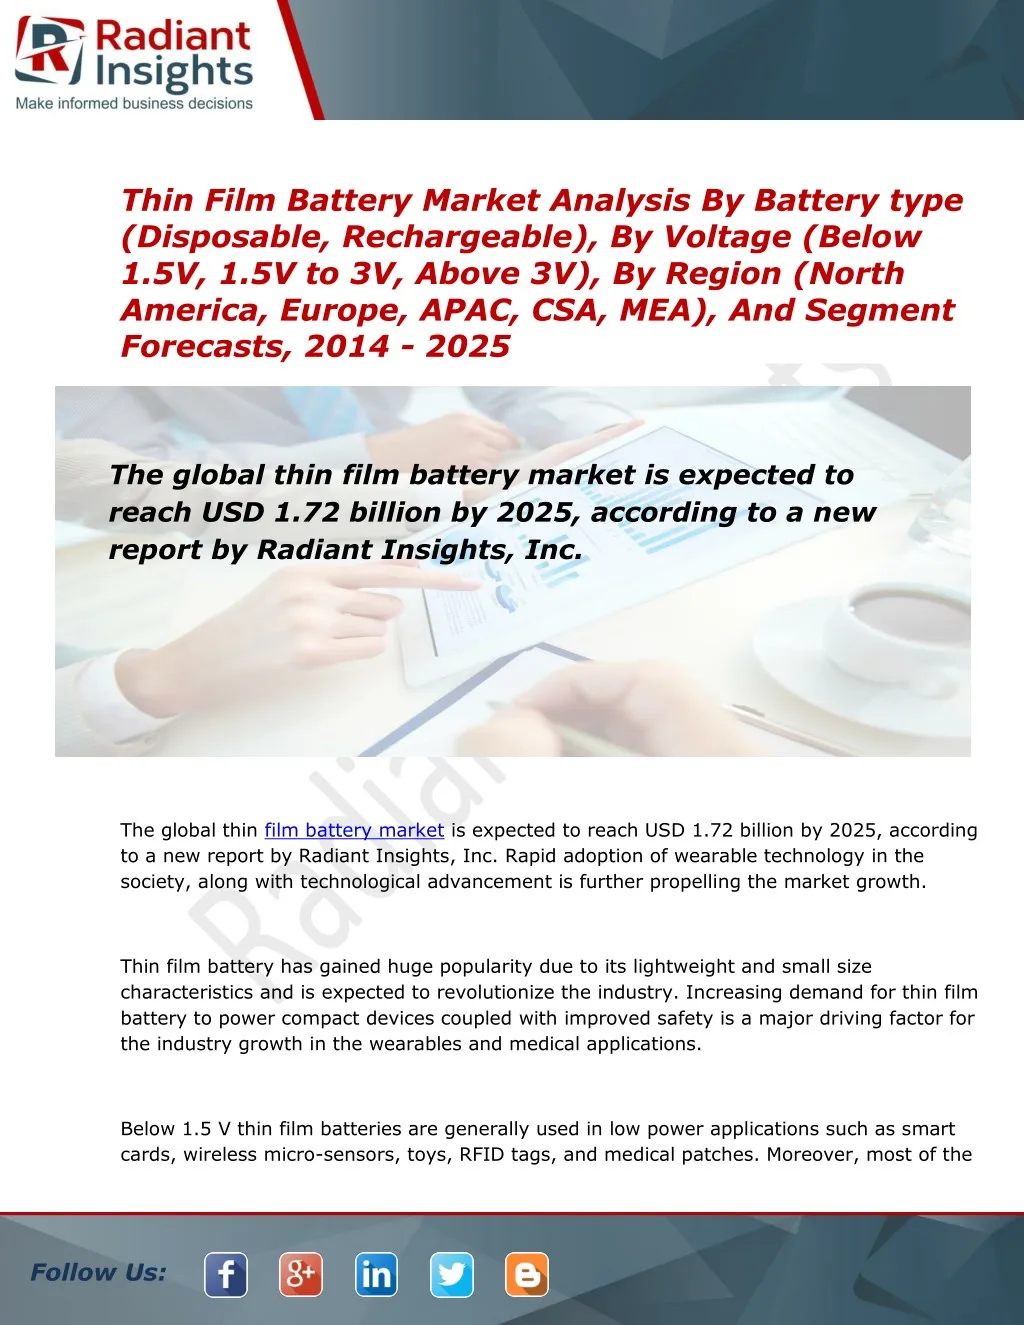 thin film battery market analysis by battery type